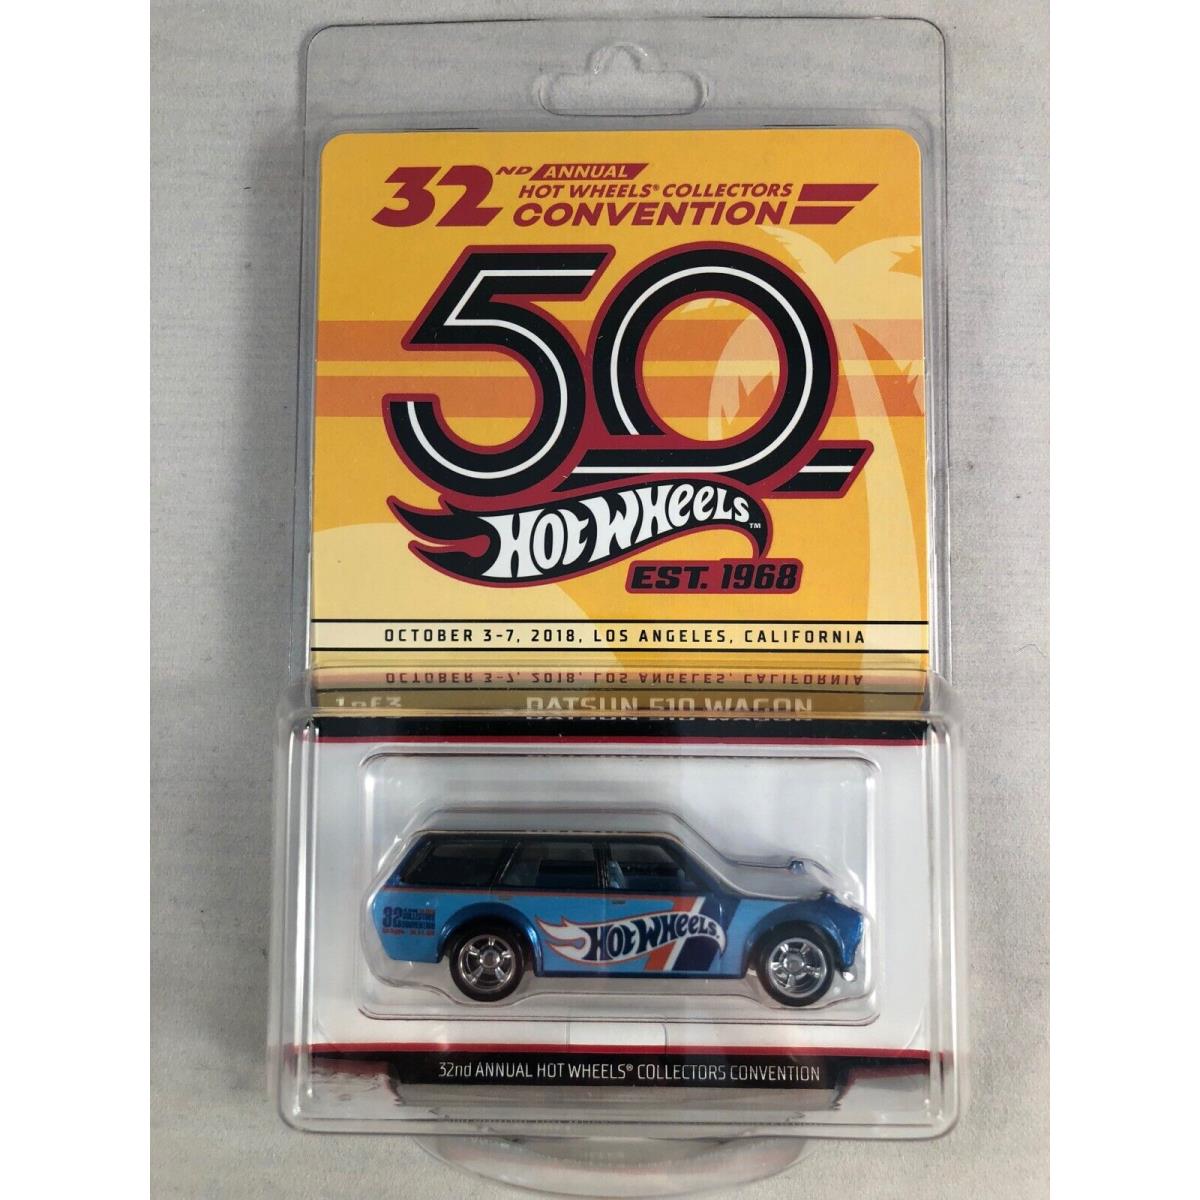 Collectors Convention 32nd Annual Hot Wheels Datsun 510 Wagon